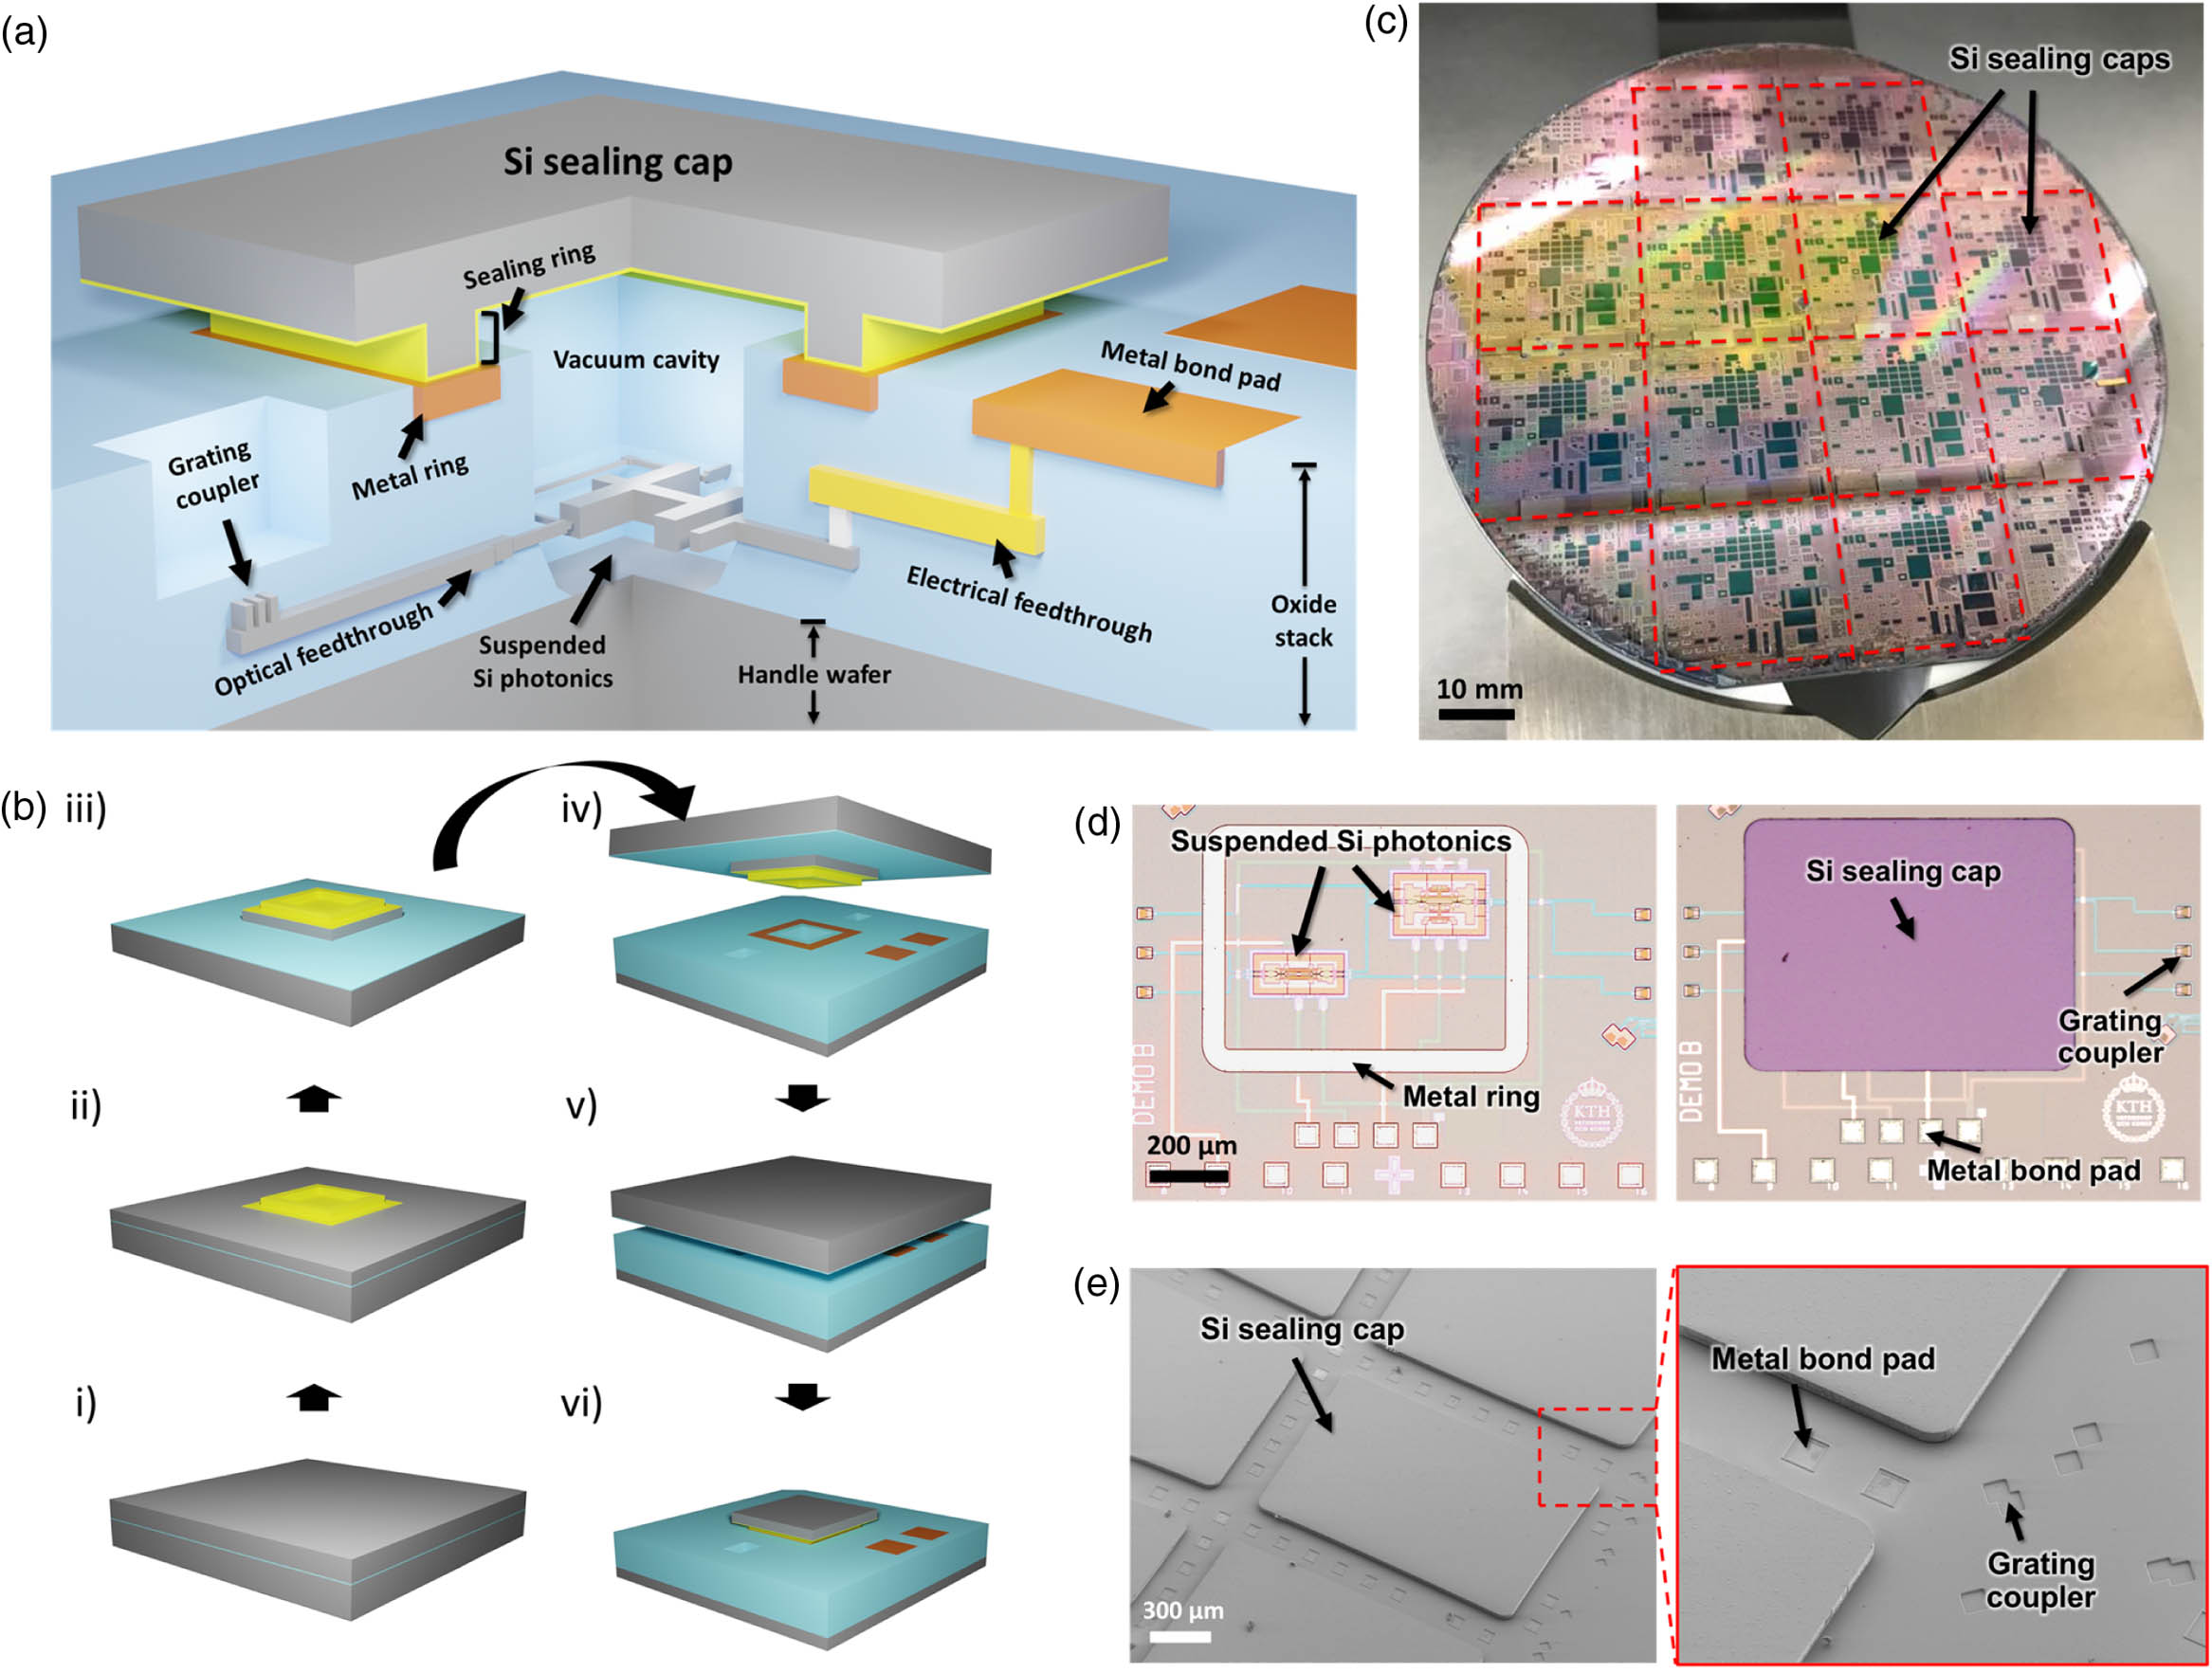 Wafer-level hermetic packaging of Si photonic MEMS. (a) Cut-away 3D illustration of a hermetically sealed suspended photonic MEMS device. (b) Process flow of the hermetic packaging approach by transfer bonding of a Si sealing cap: steps (i), (ii) patterning of sealing rings by deep reactive ion etching (DRIE) on the SOI cap wafer, followed by TiW/Au deposition and etching; (iii) etching of the sealing caps; (iv), (v) wafer alignment of the SOI wafer containing the caps and photonic device wafer, and bonding of the wafers inside a vacuum chamber at 250°C; (vi) removal of the Si handle (substrate) layer of the SOI cap wafer by DRIE such that only the thin vacuum sealing caps remain on the photonic device wafer. (c) Photograph of a full wafer with sealed Si photonic MEMS. (d) Microscope images before sealing (left) and after sealing (right). (e) SEM images of the bond pads and grating couplers around the thin sealing caps.